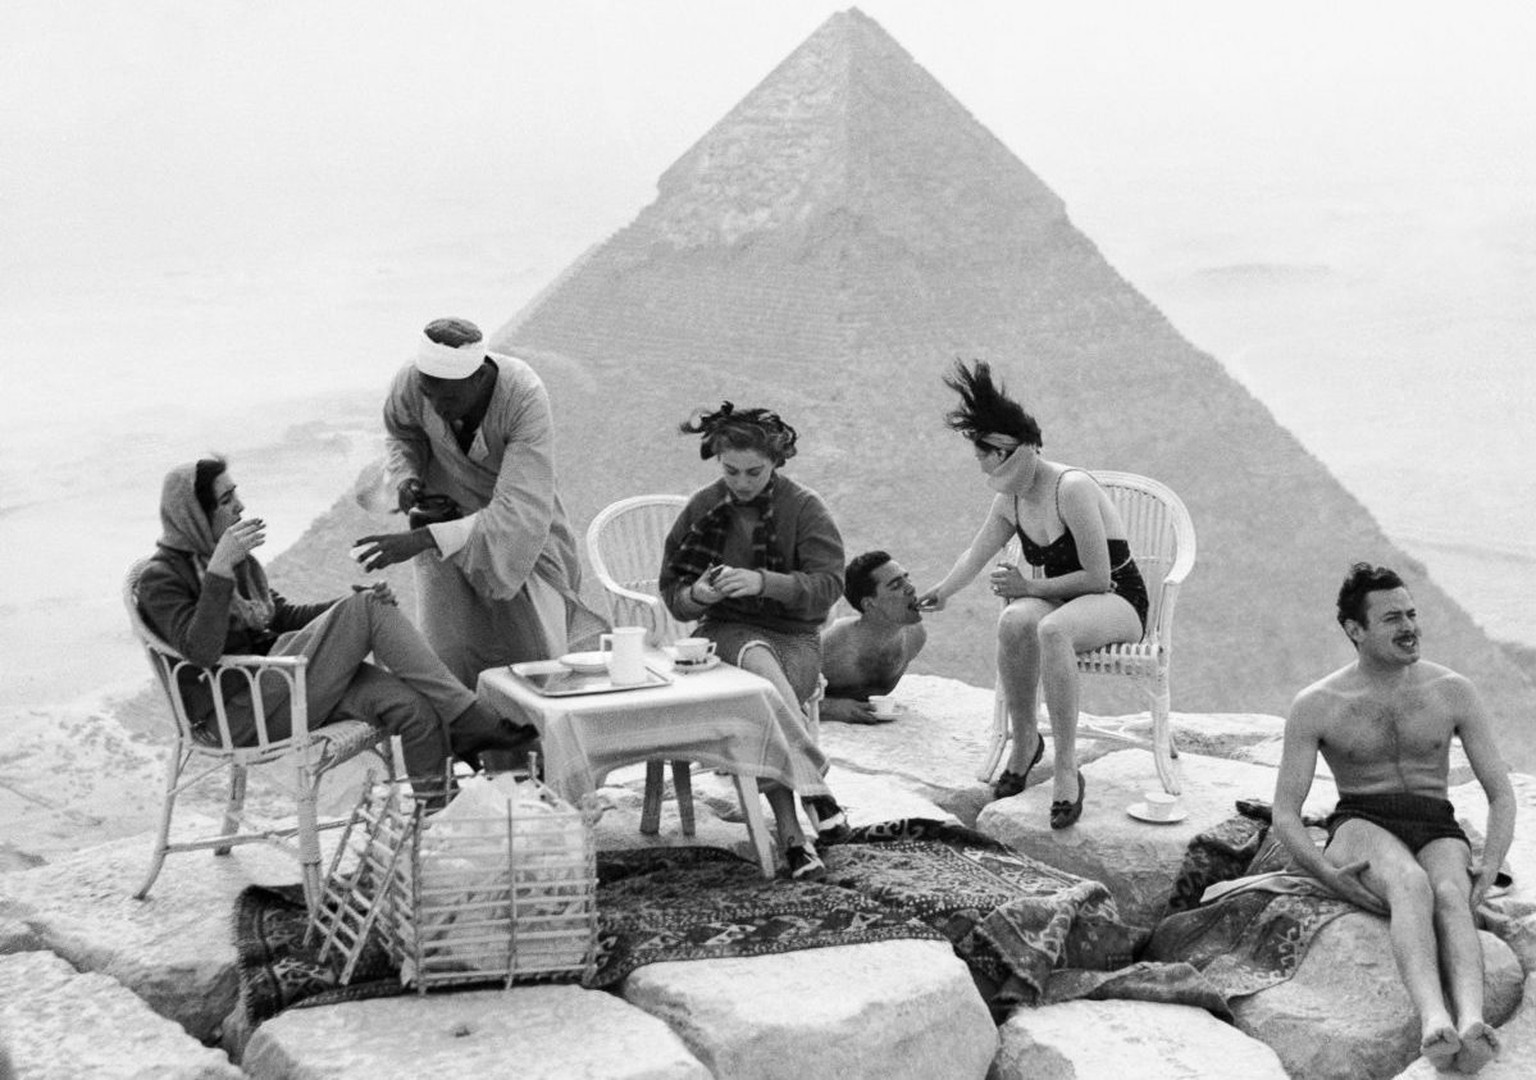 Tourists lounging on top of the Great Pyramid of Giza in 1938. [930 x 1207]
bild: reddit